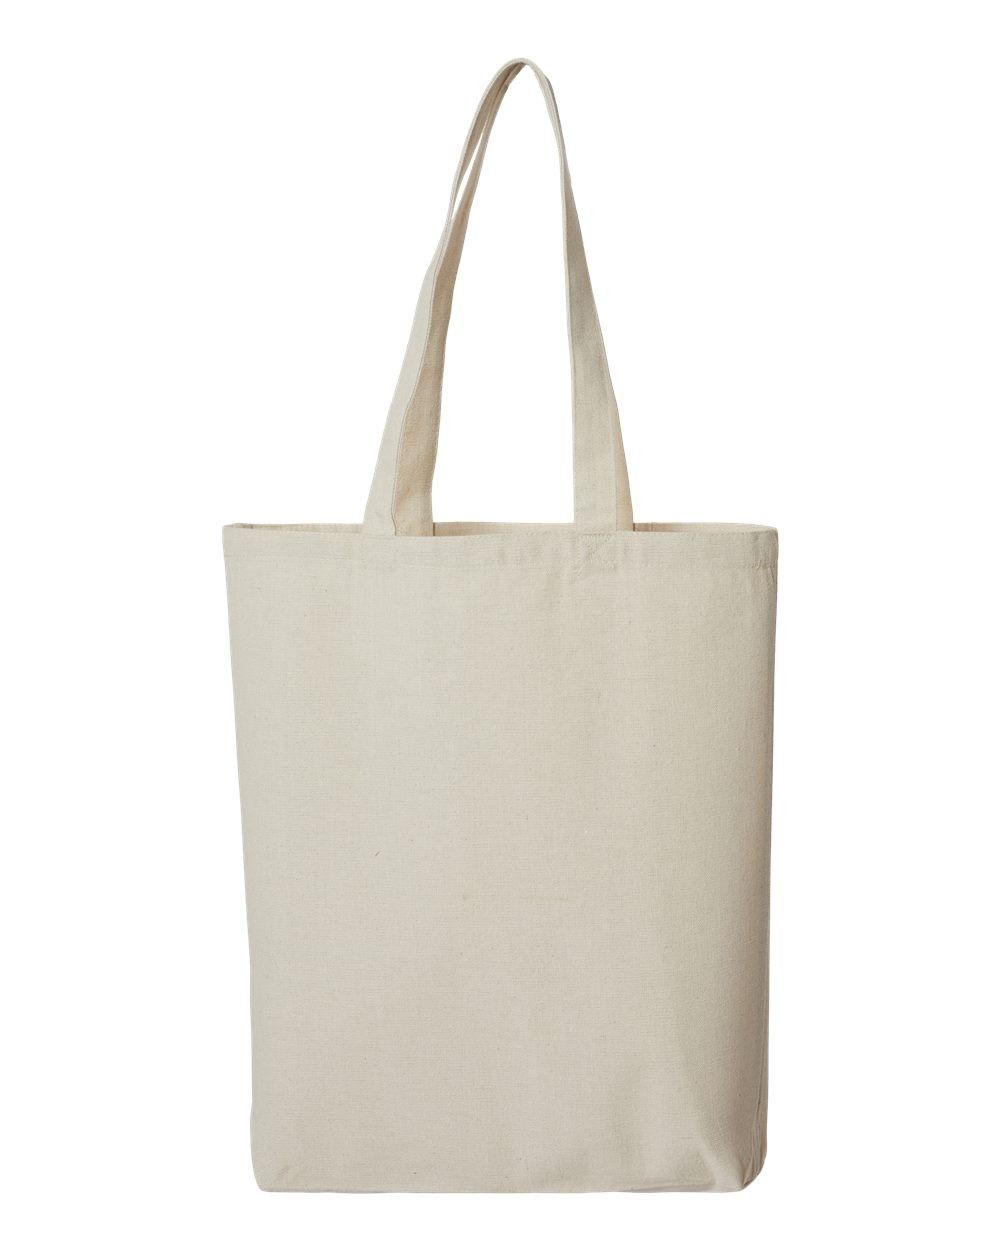 Custom OAD Midweight Recycled Cotton Gusseted Tote - Coastal Reign